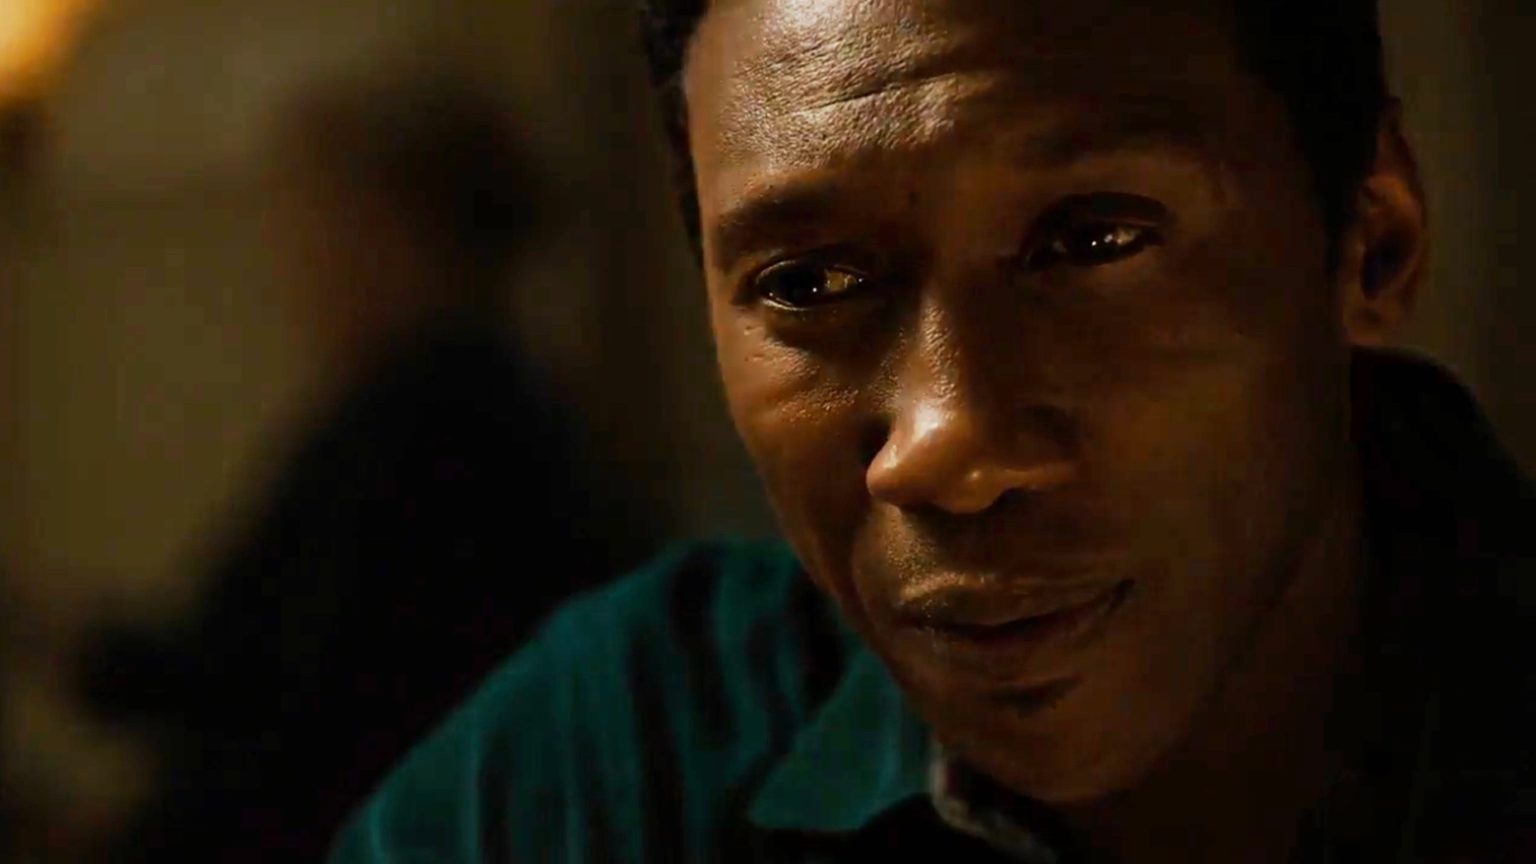 Mahershala Ali is starring in a film for Apple TV+.